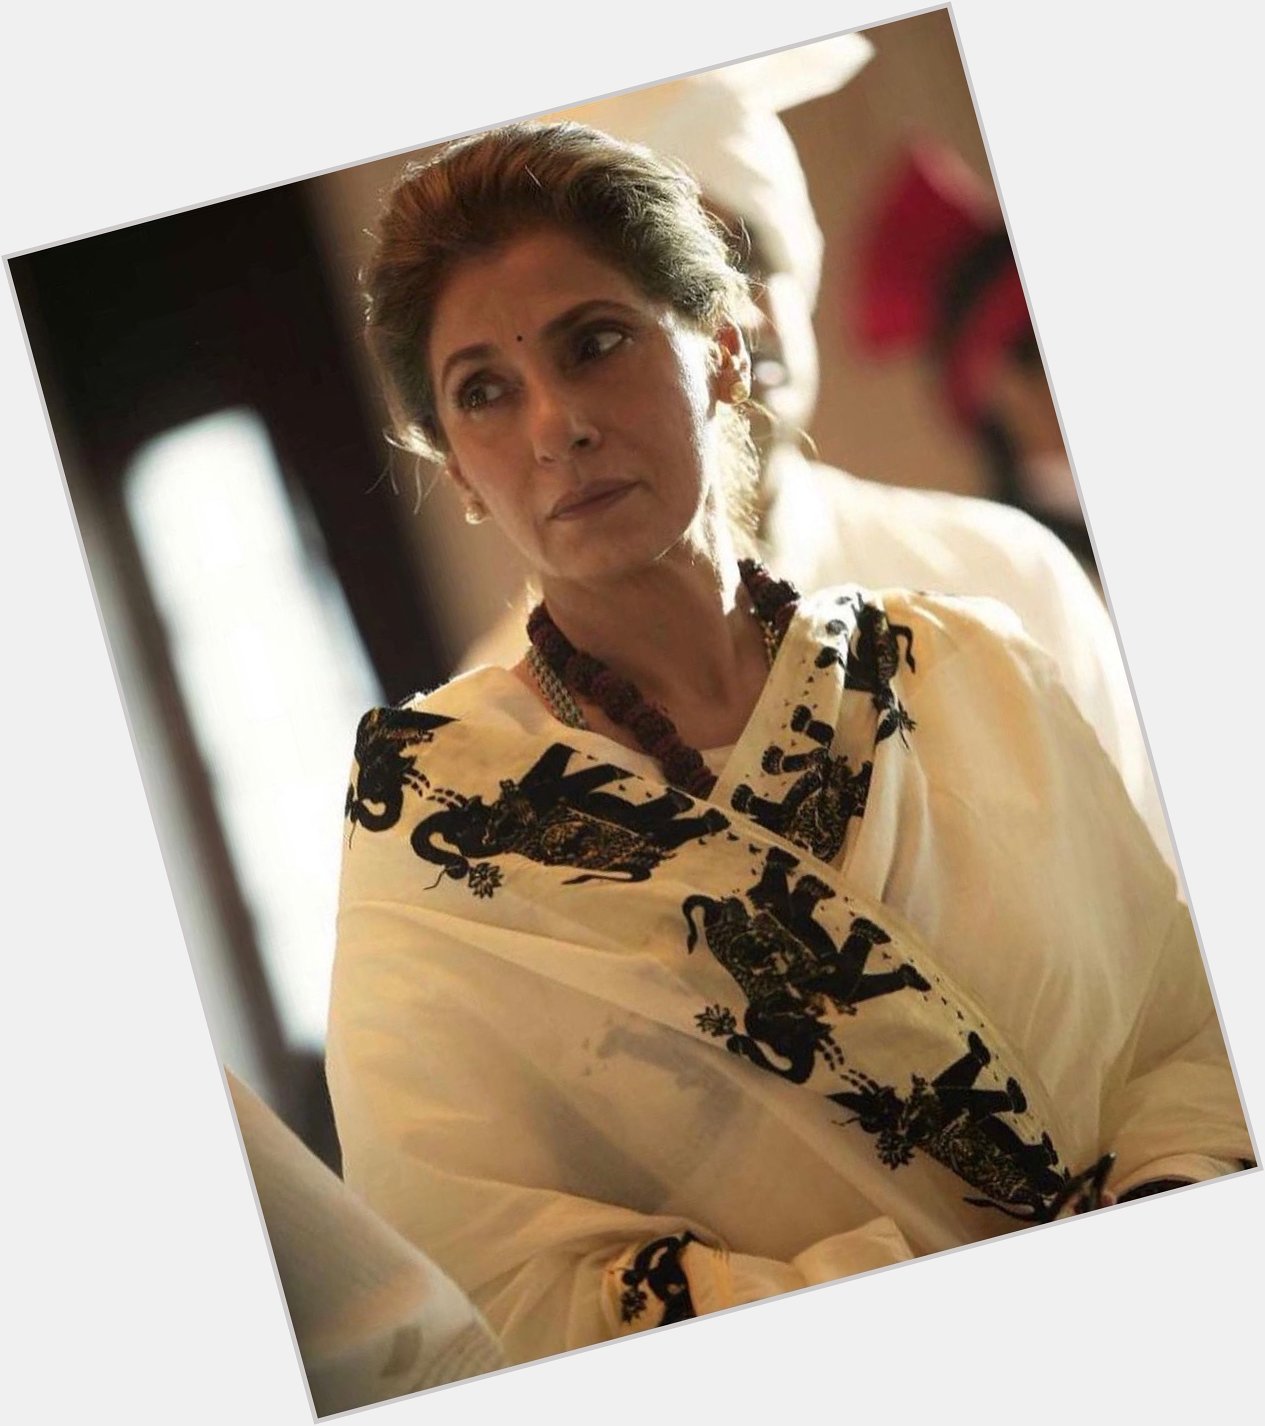 The veteran actress DIMPLE KAPADIA
Celebrates her 64th birthday today. We wish her a great HAPPY BIRTHDAY ! 